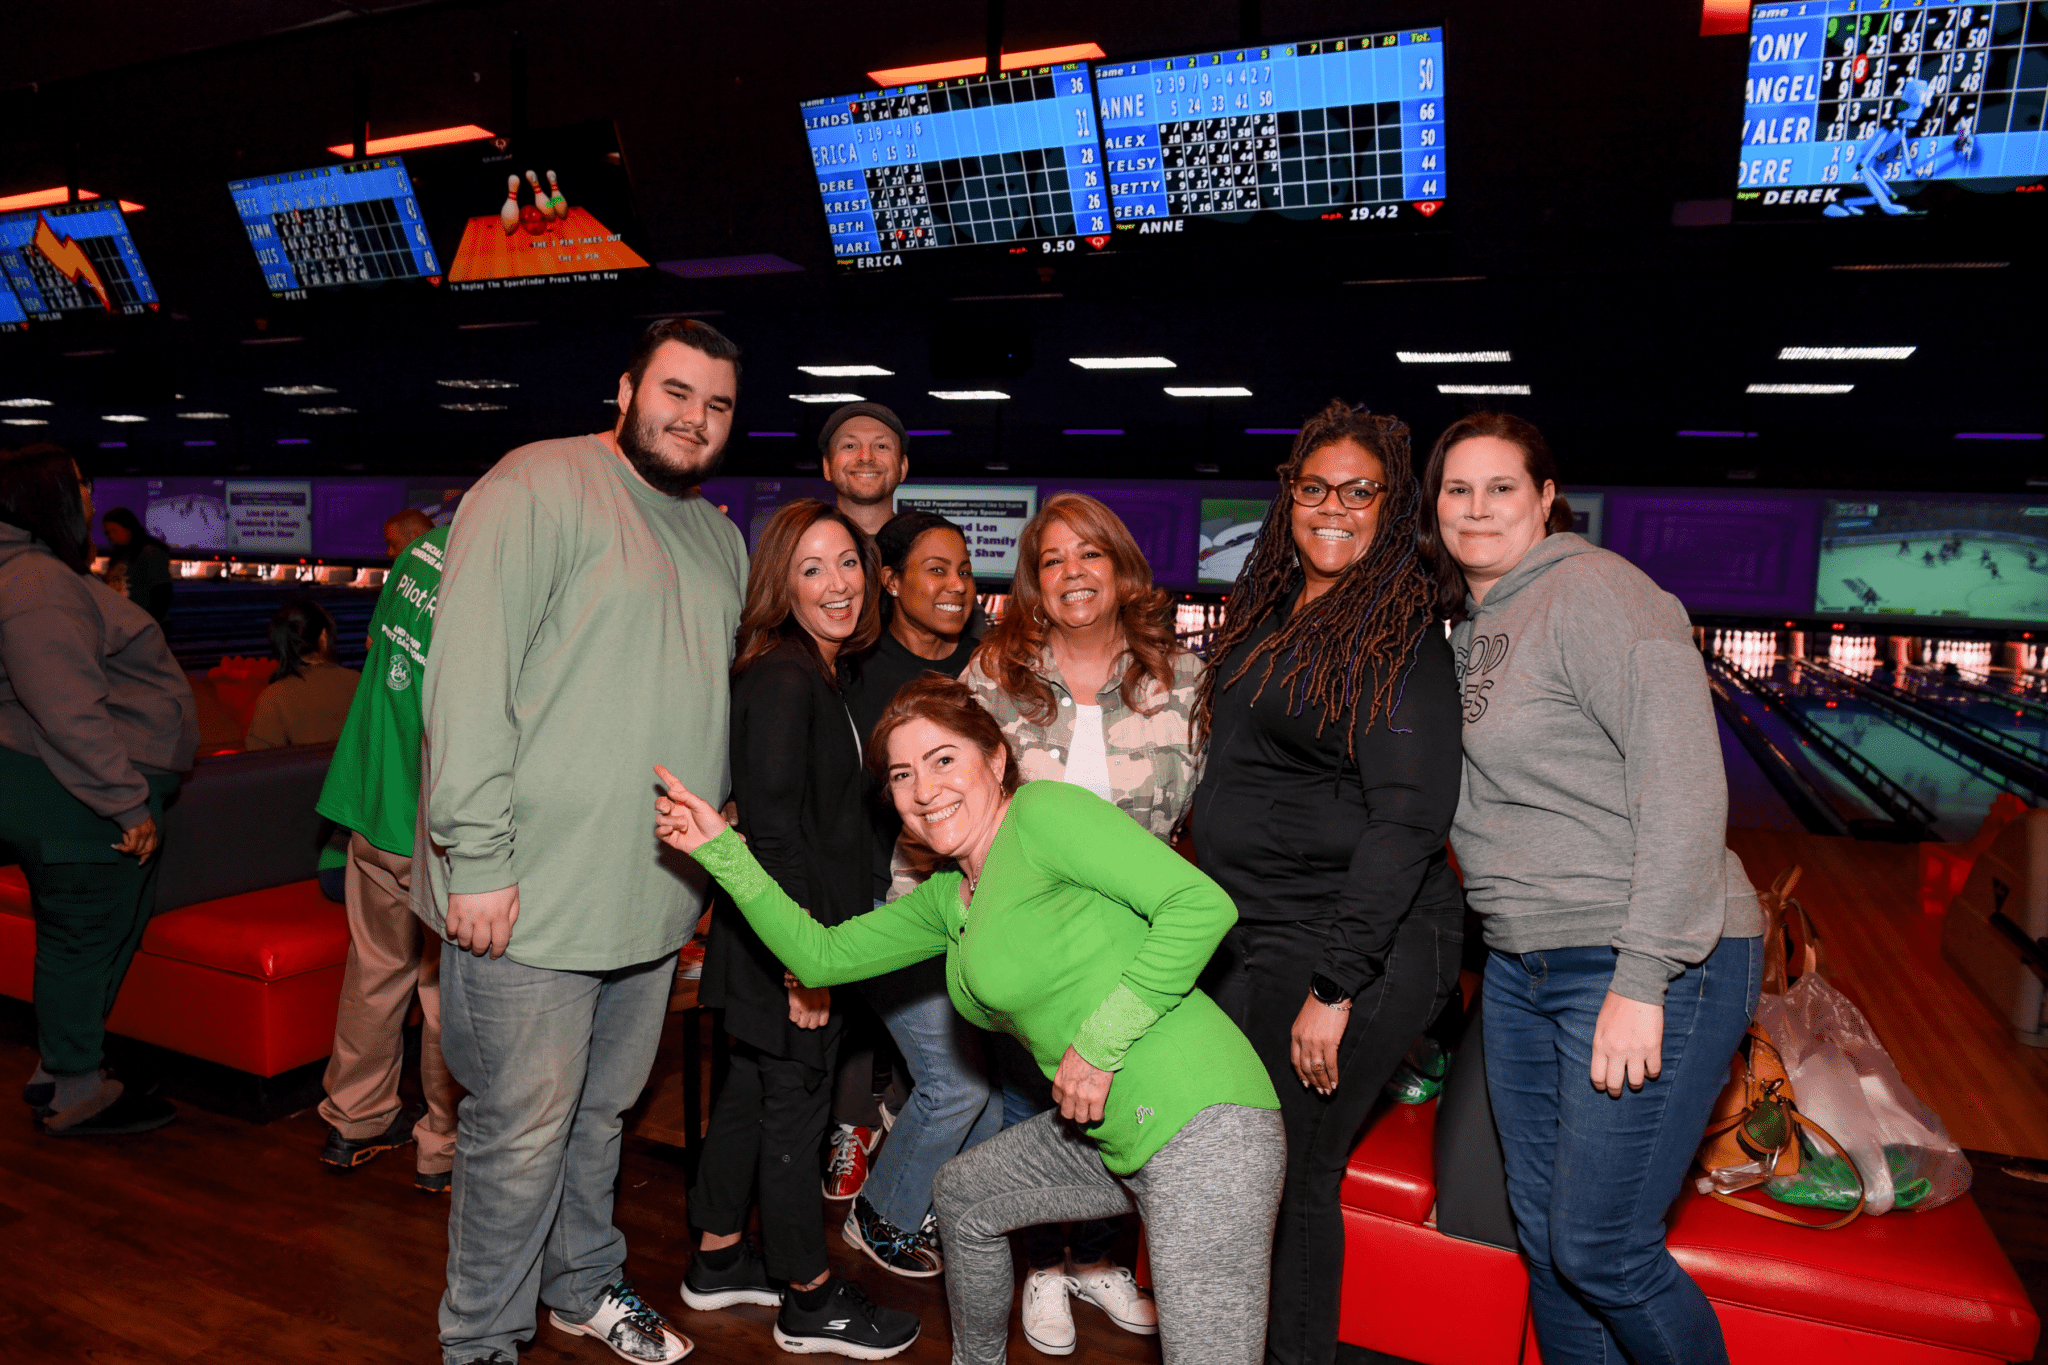 A group of individuals posing and smiling at a bowling alley